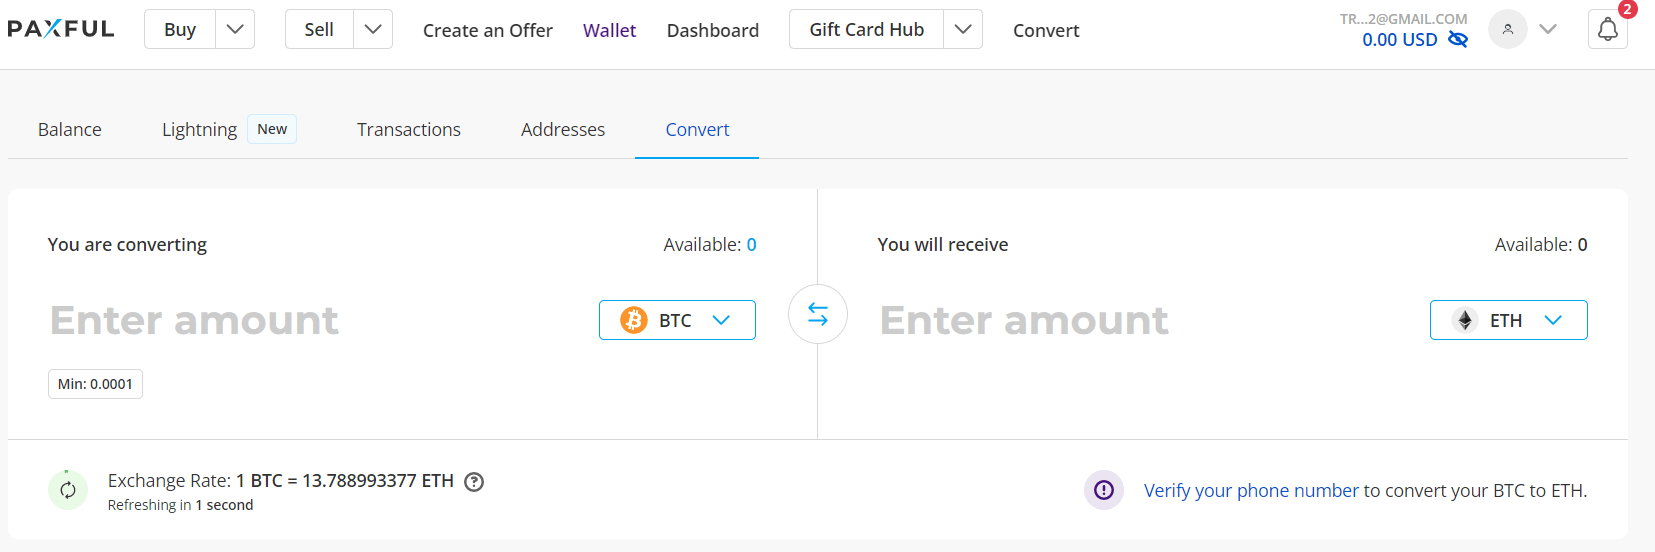 Follow our guide to set up a Paxful hot wallet and begin trading crypto